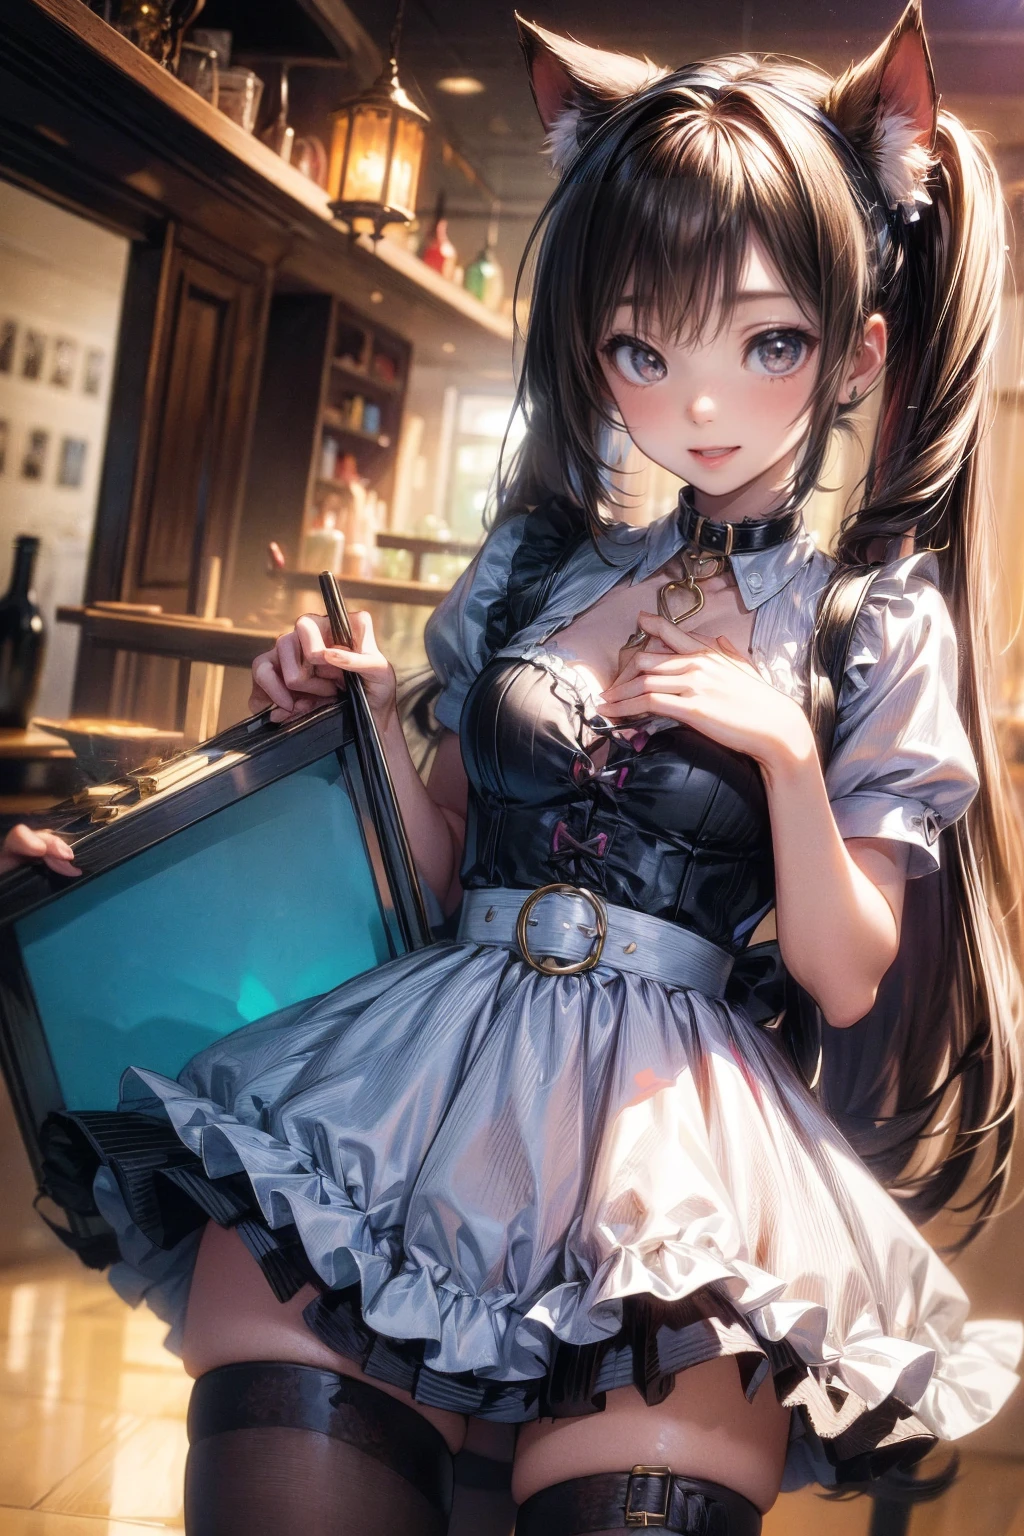 One Girl、(20-year-old woman)、Cat ears headband、Cat tail、Black maid outfit、Holding a tray with two parfaits on it in one hand、With the other hand, lift your skirt to show your underwear、Short skirt、I can see your pants、White knee-high socks、Striped pants、Highest quality、8K、Beautiful Face、Mischievous smile、Wink to the viewer、View Viewer、A bright cafe with a black cat